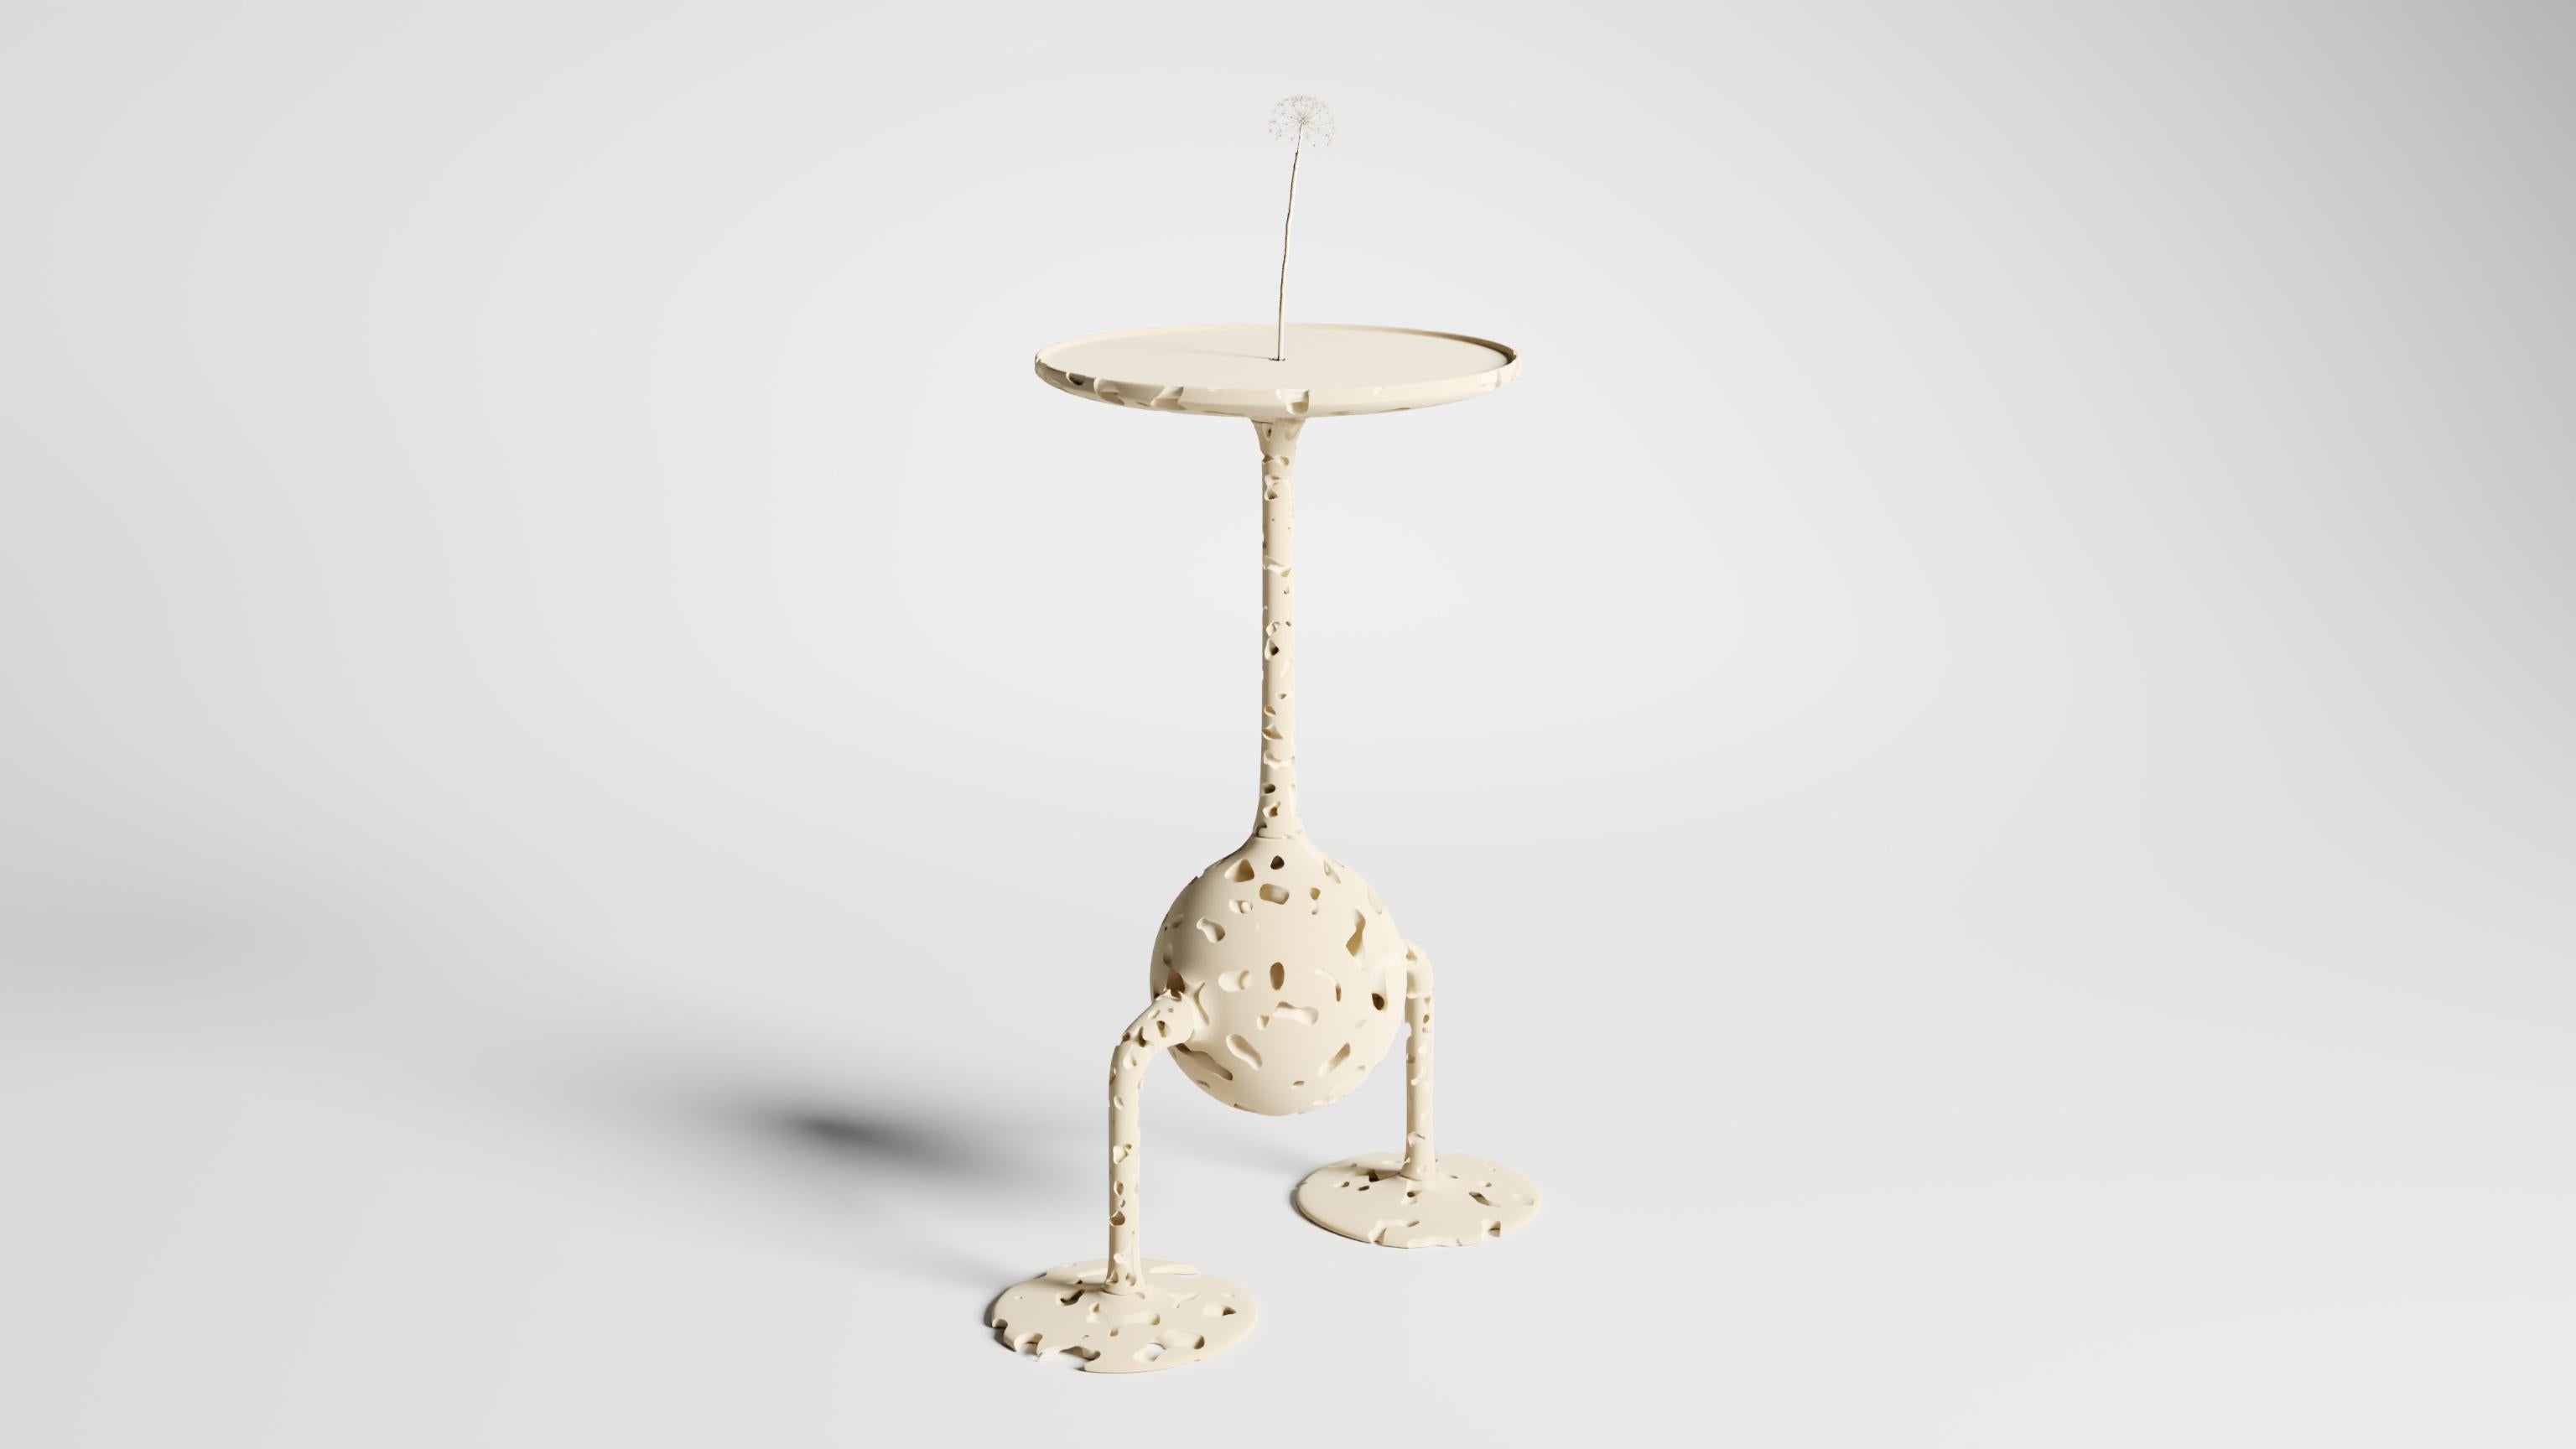 Sculptural table by Taras Zheltyshev
Dimensions: 65 x 50 x 35 cm
Materials: Plastic, metal, enamel or wood, enamel

Dino table is an item from the Micro collection. The bipedal
assistant of a man, he represents the youngest relative of